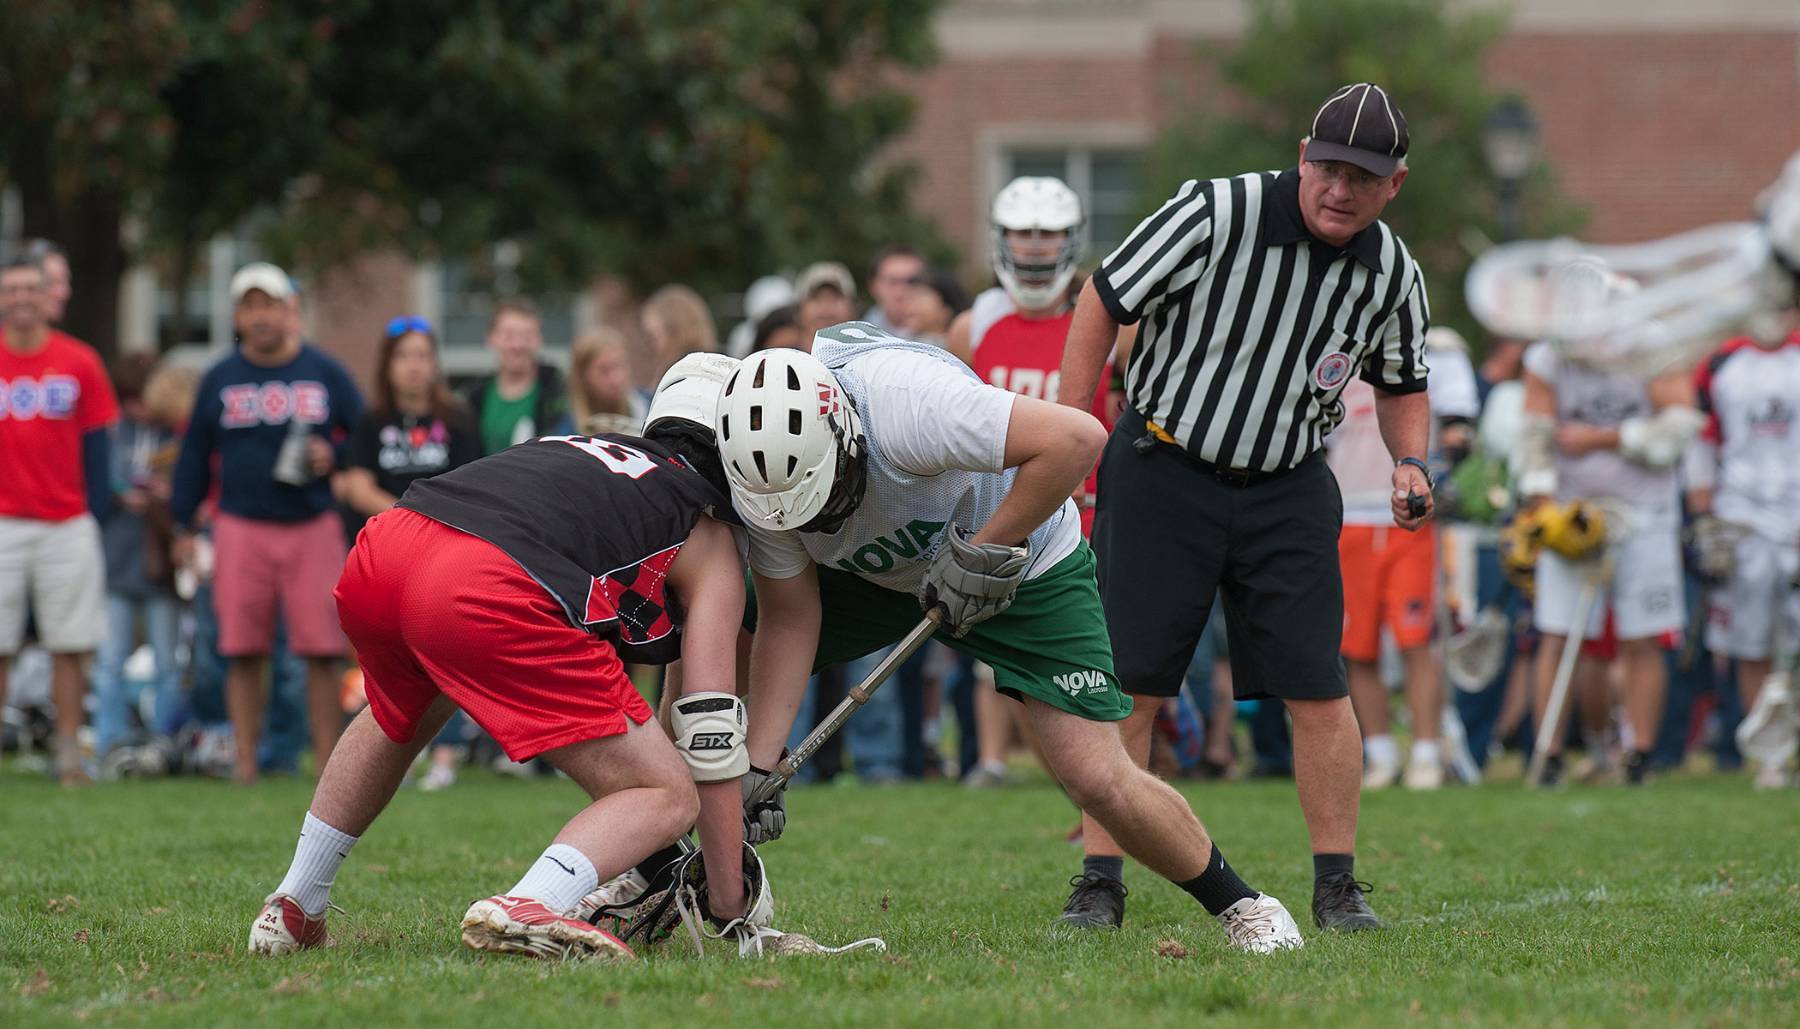 Students on the Men's Lacrosse club competing against another university.